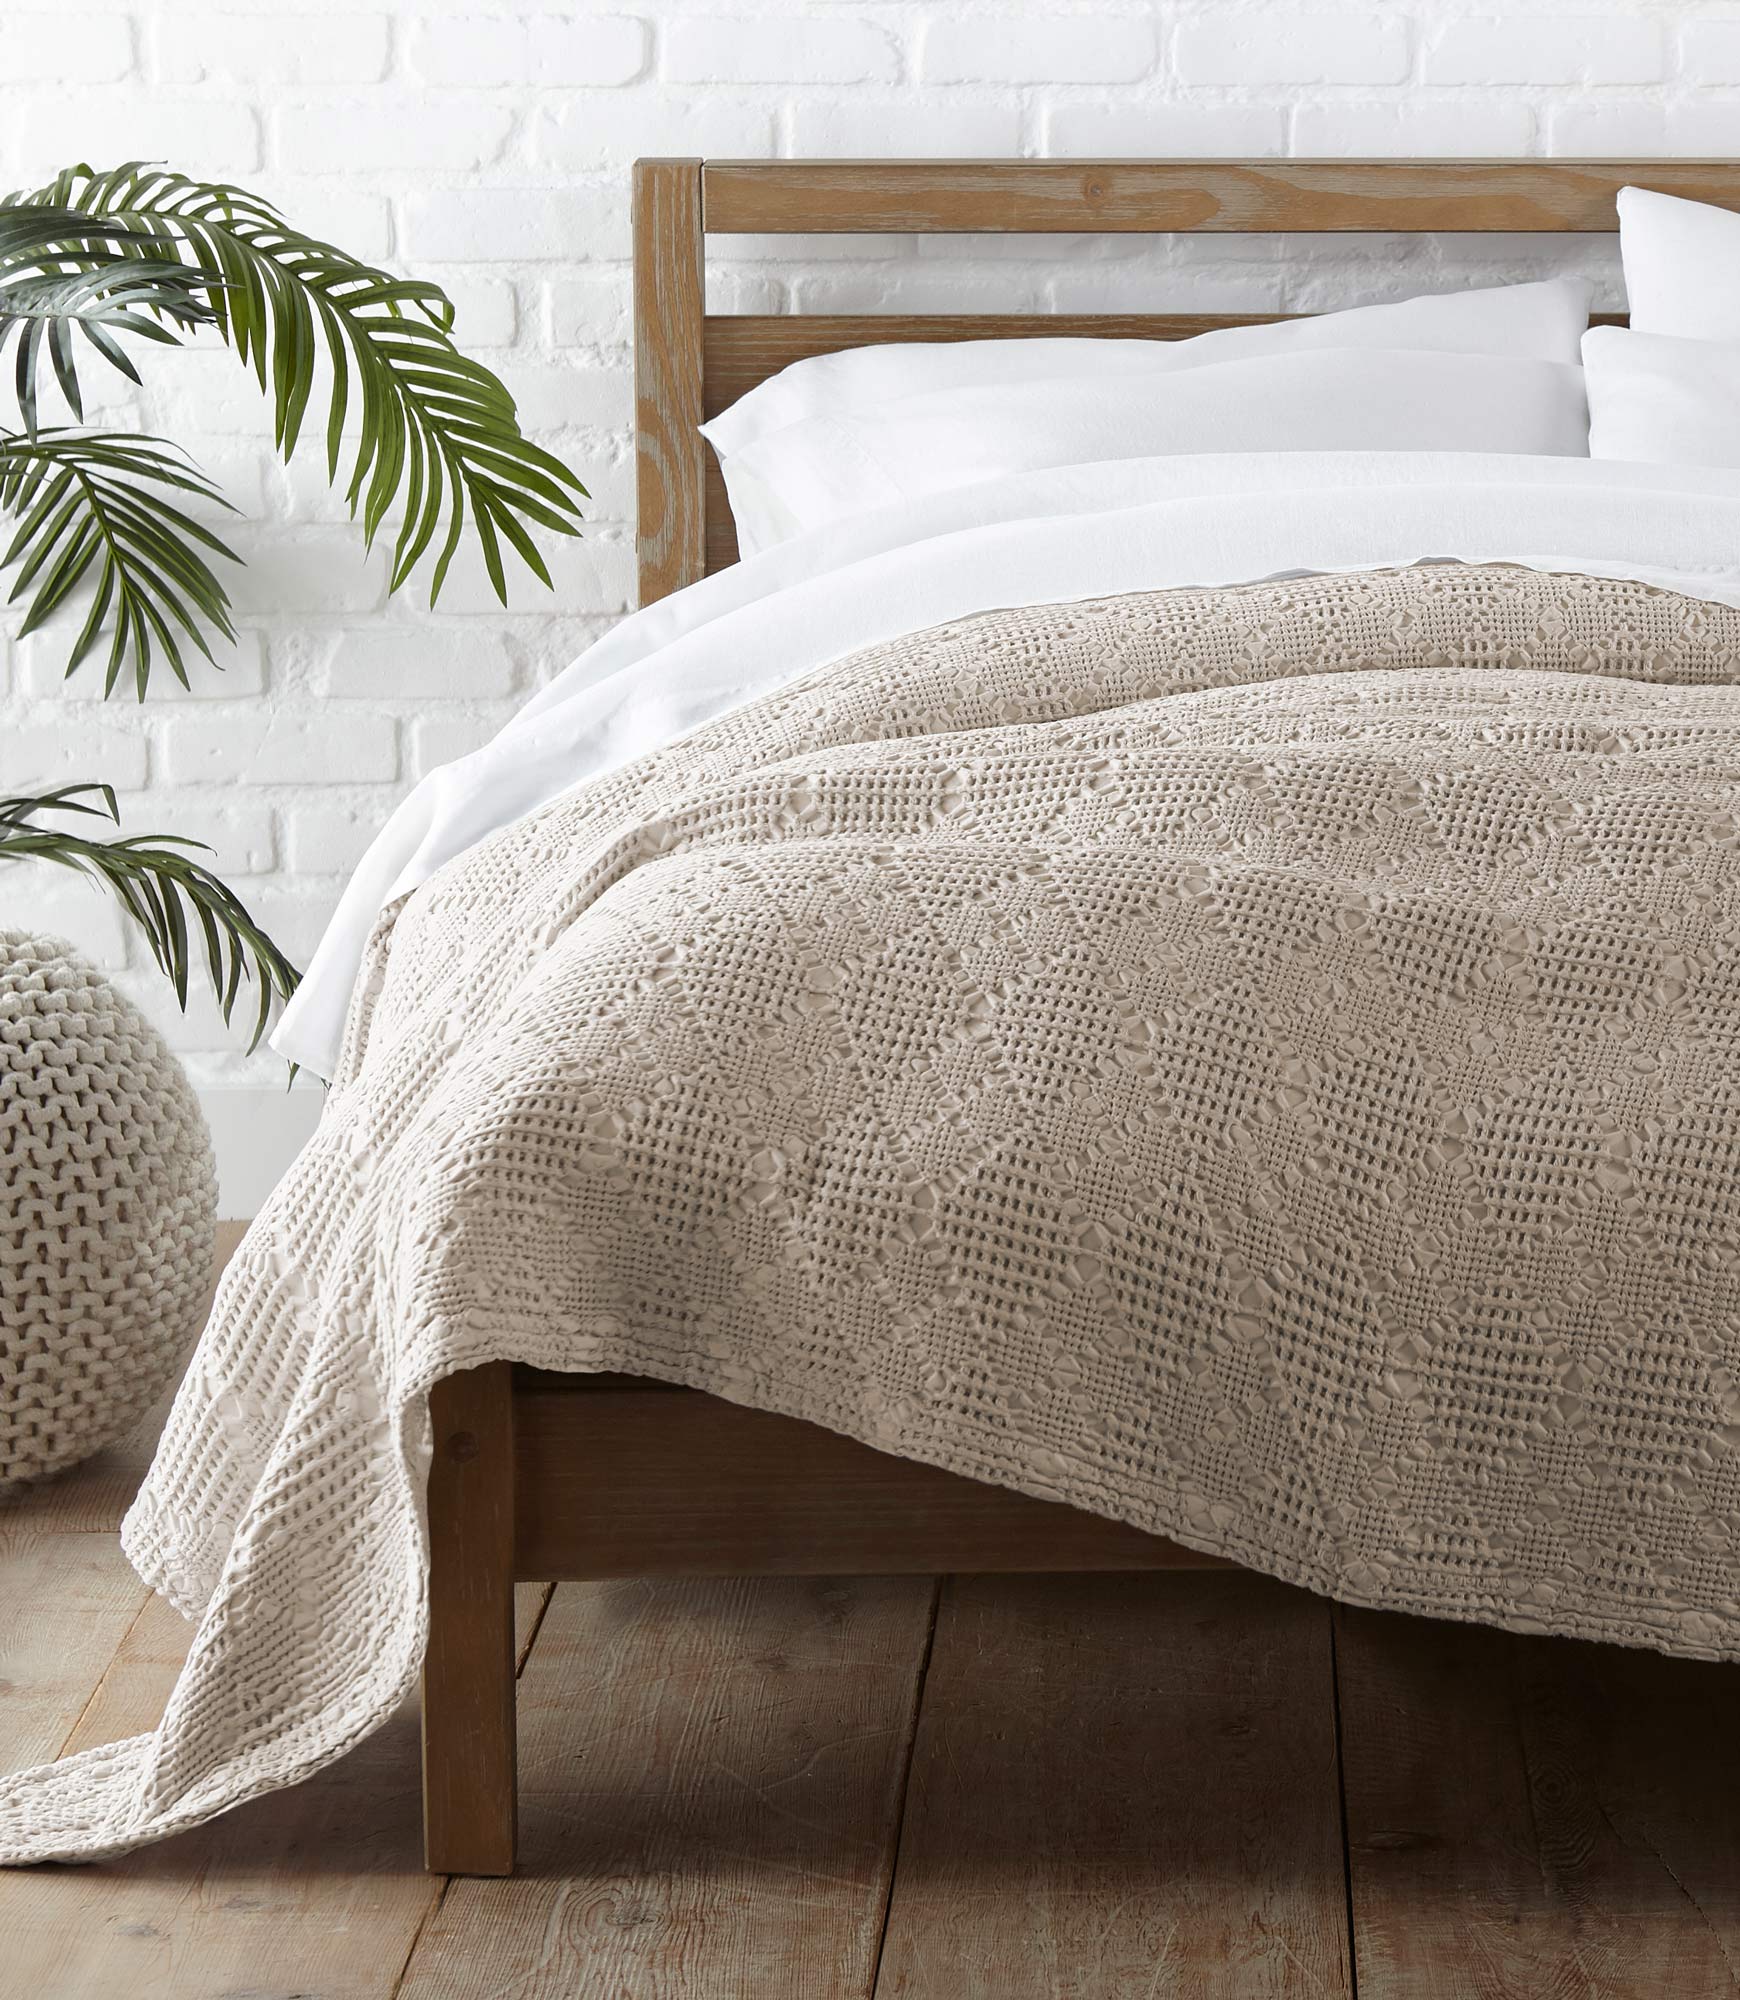 Textured Blanket Taupe on bed